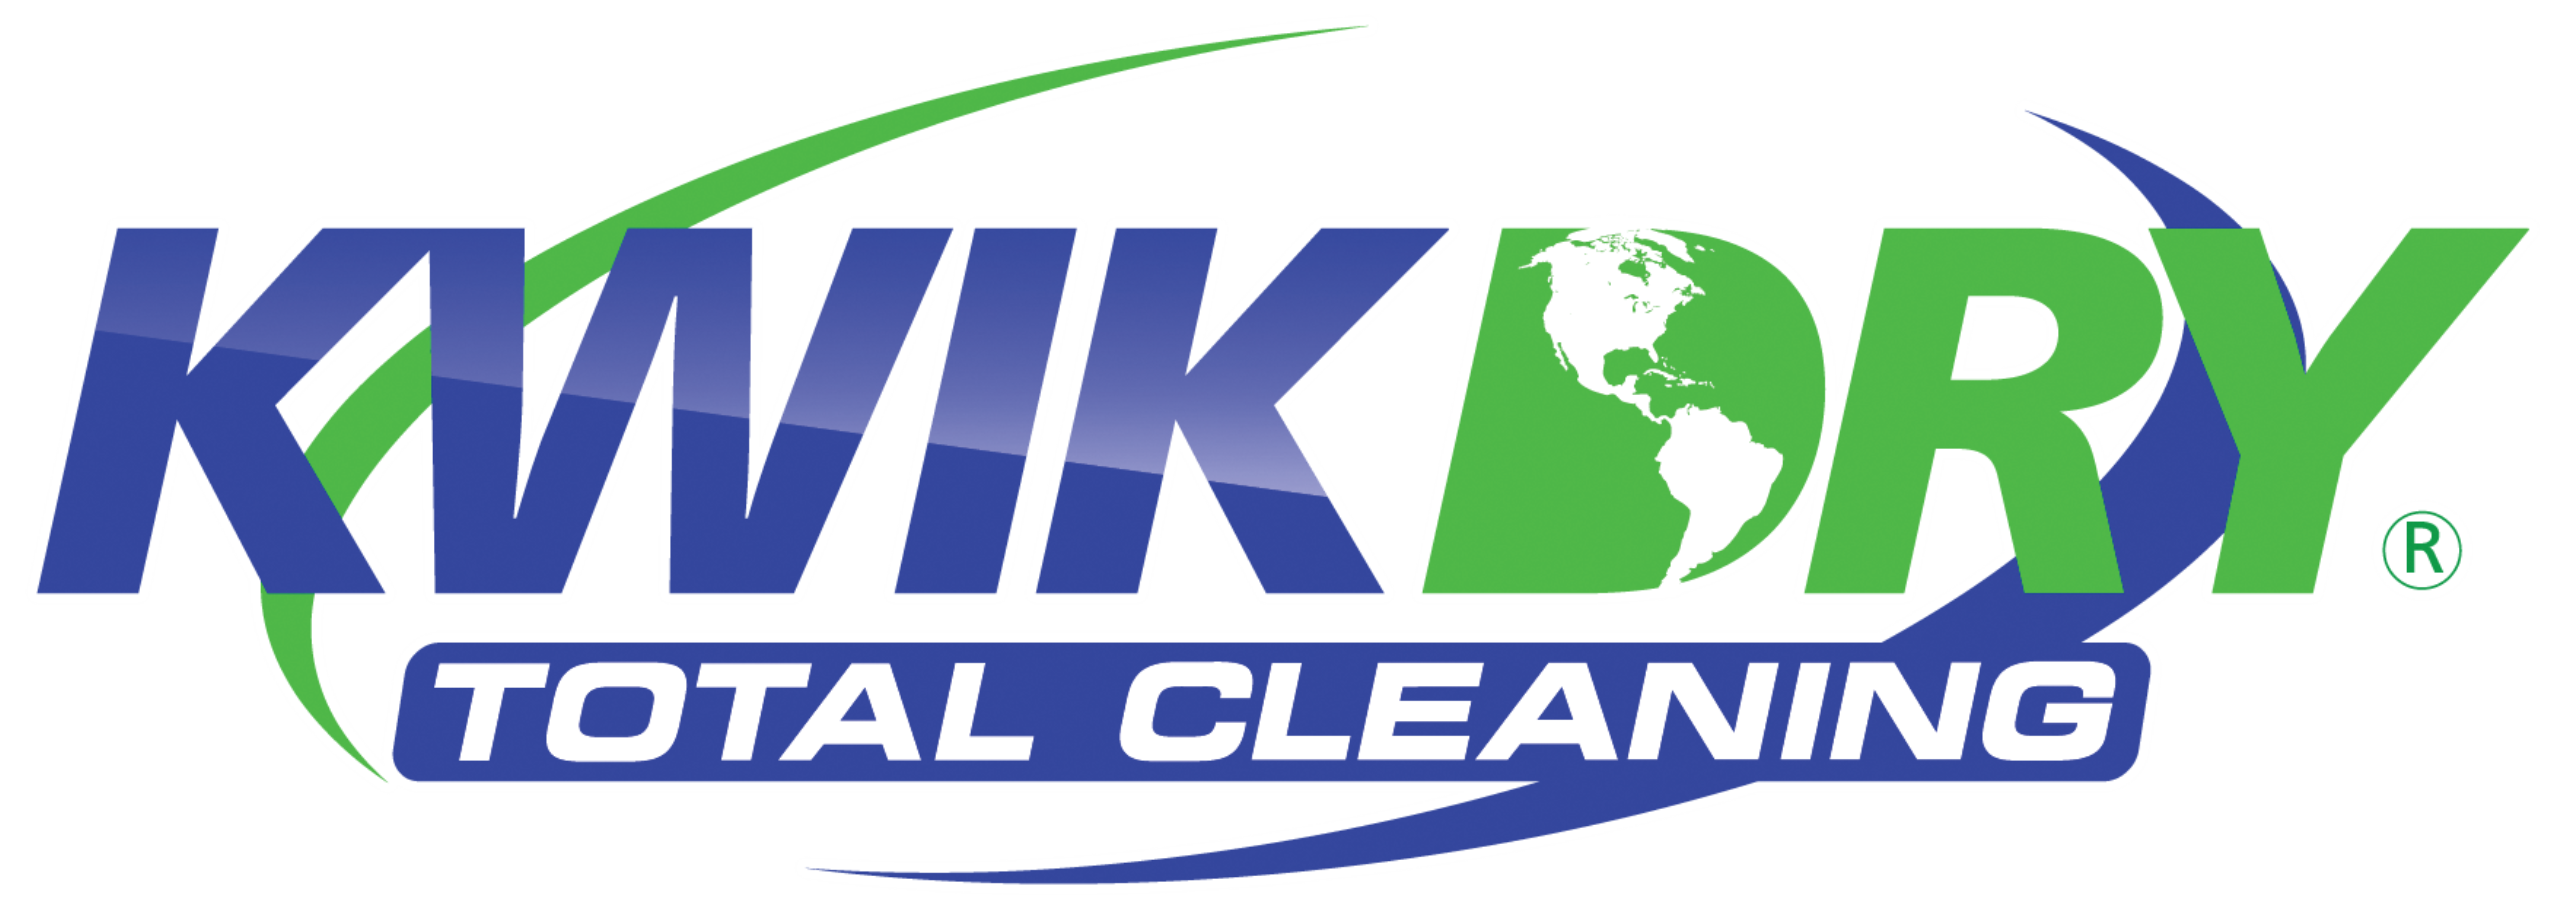 Springfield Kwik Dry Total Cleaning Logo